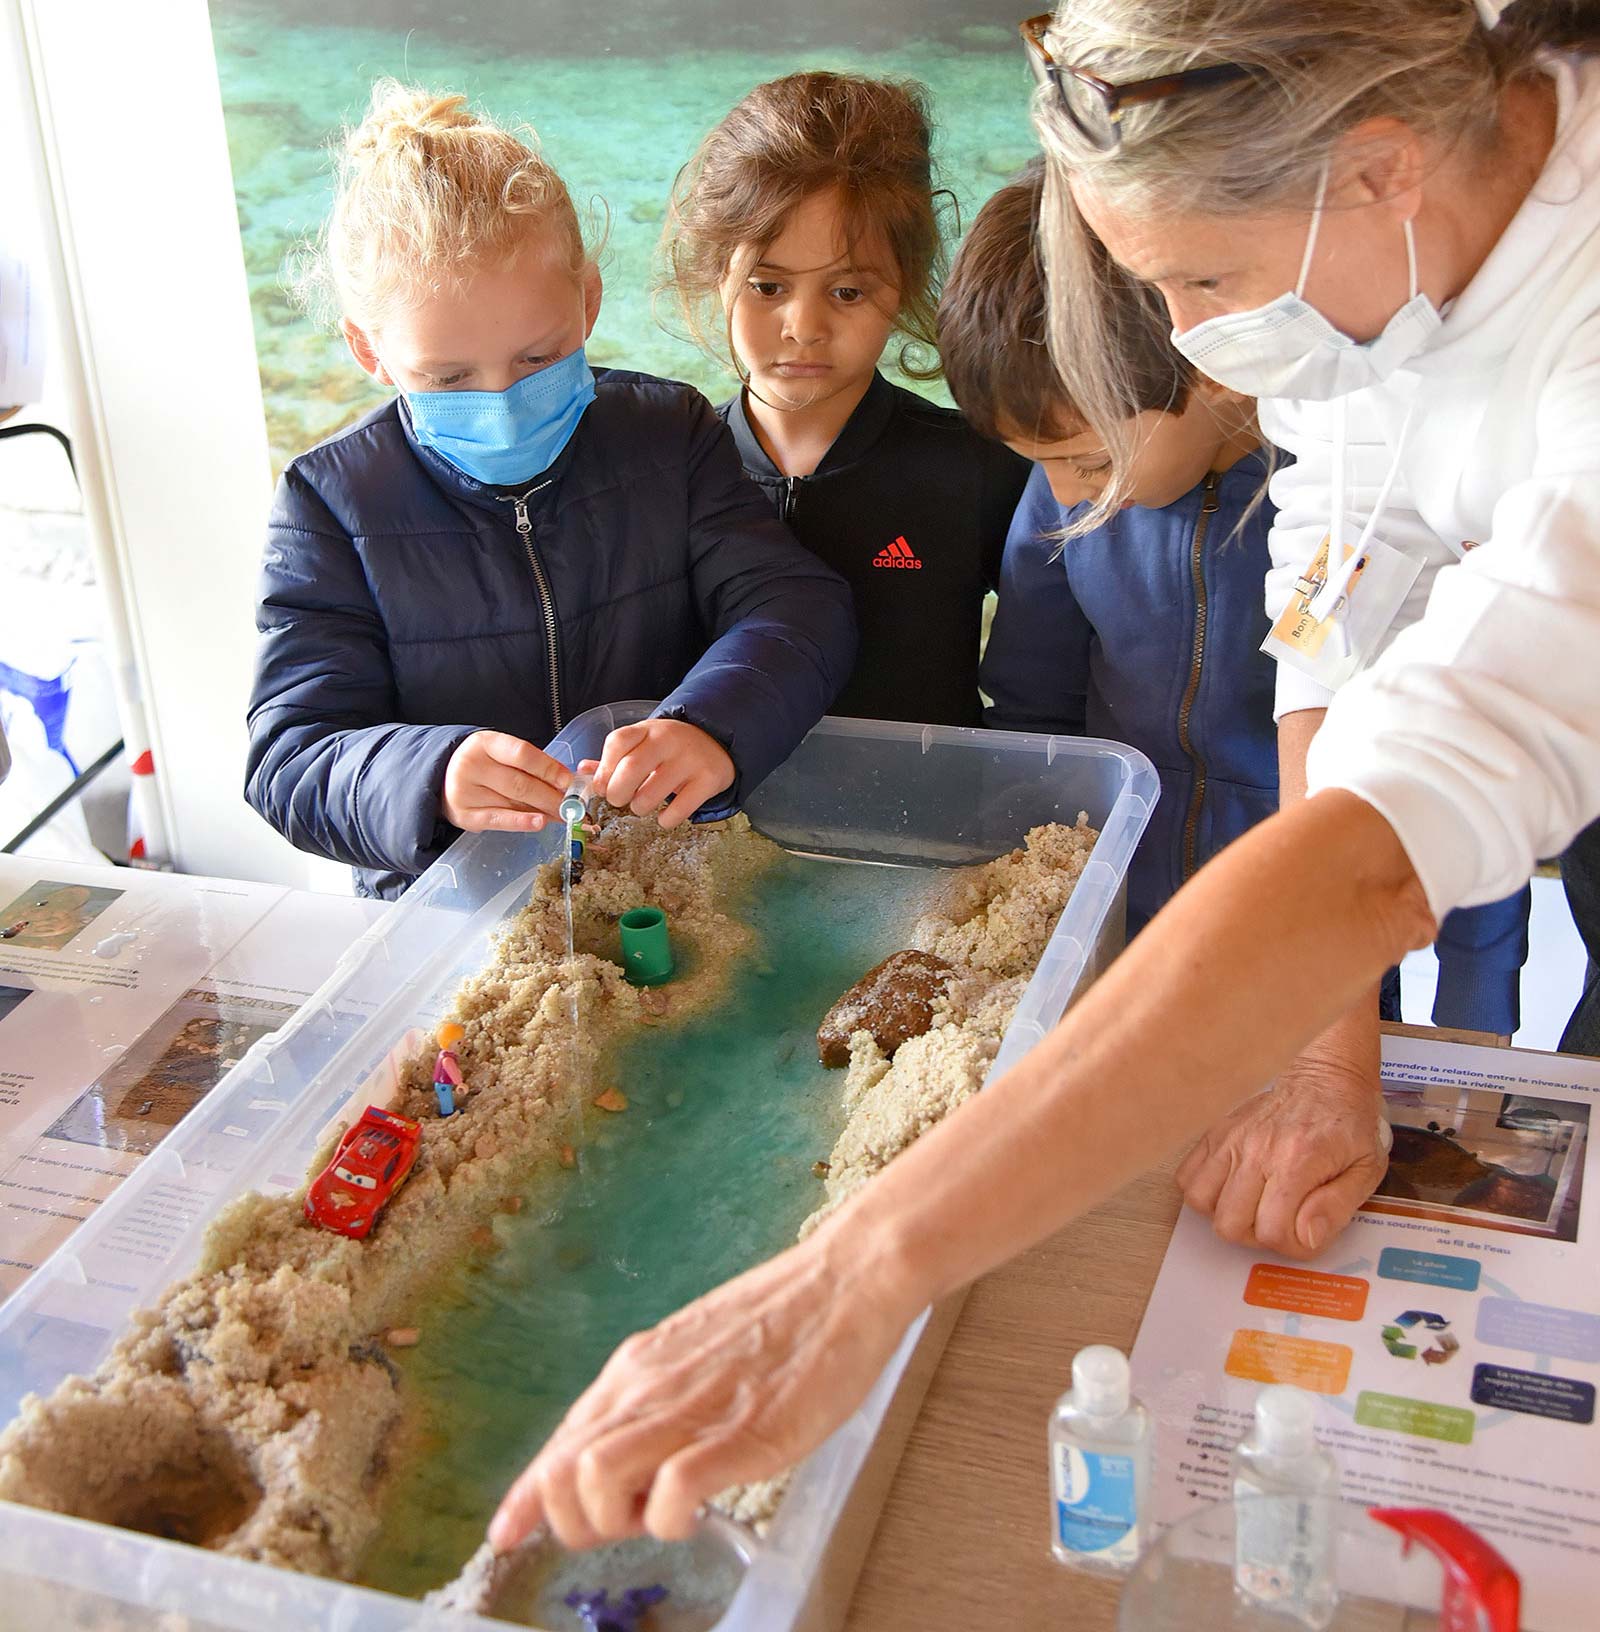 Science Festival 2021 at BRGM in Orléans sees record attendance. © BRGM